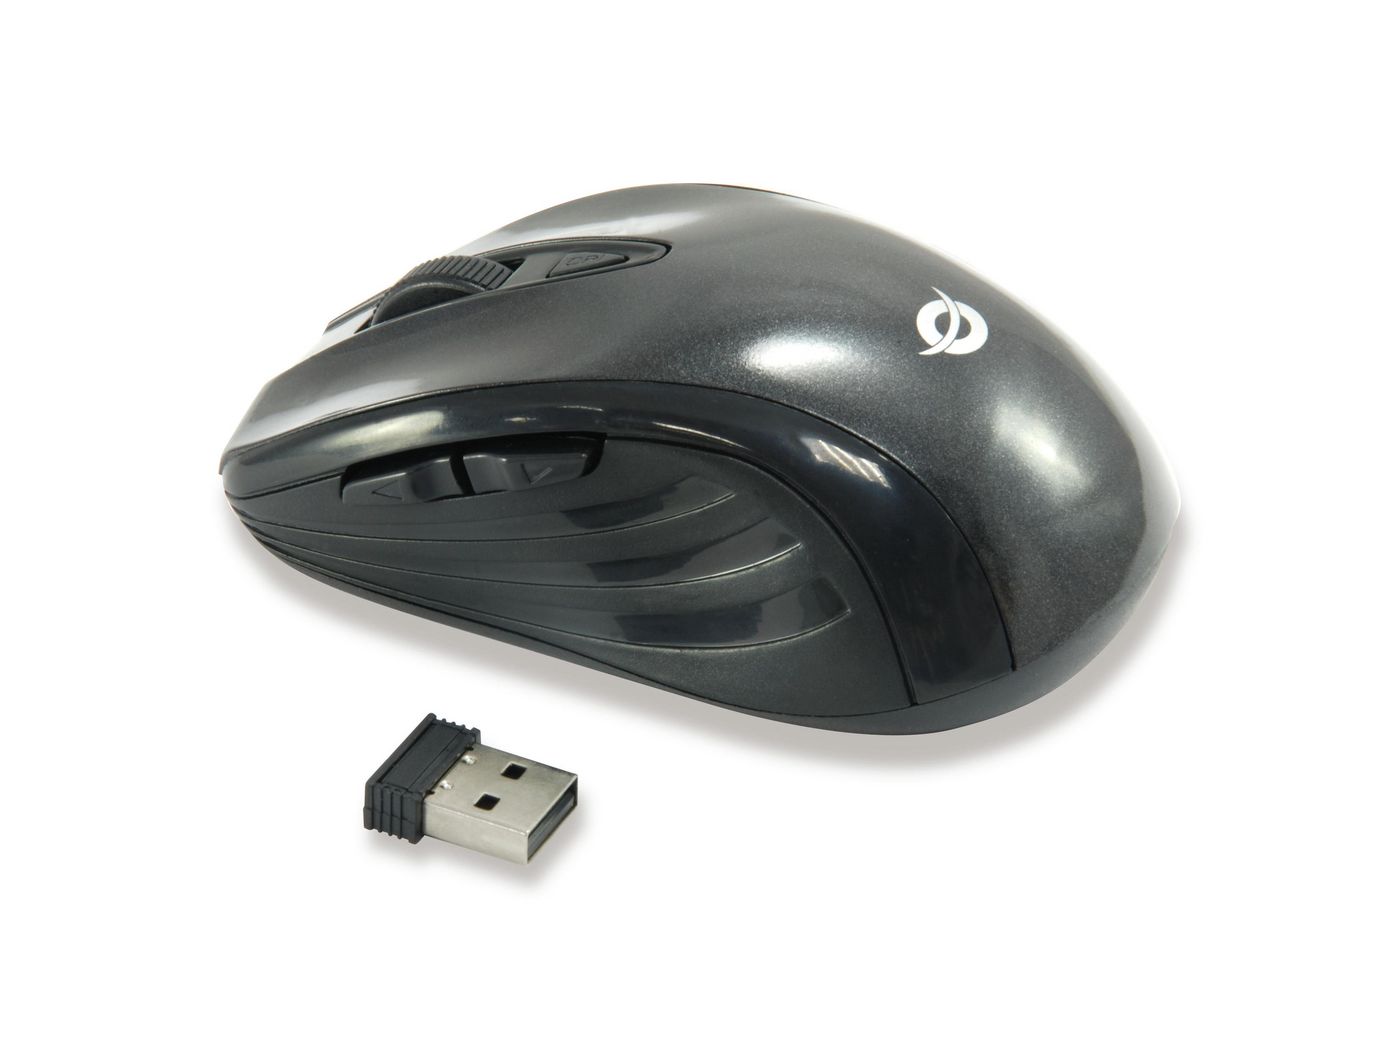 Conceptronic CLLM5BTRVWL OPTICAL WIRELESS TRAVEL MOUSE 